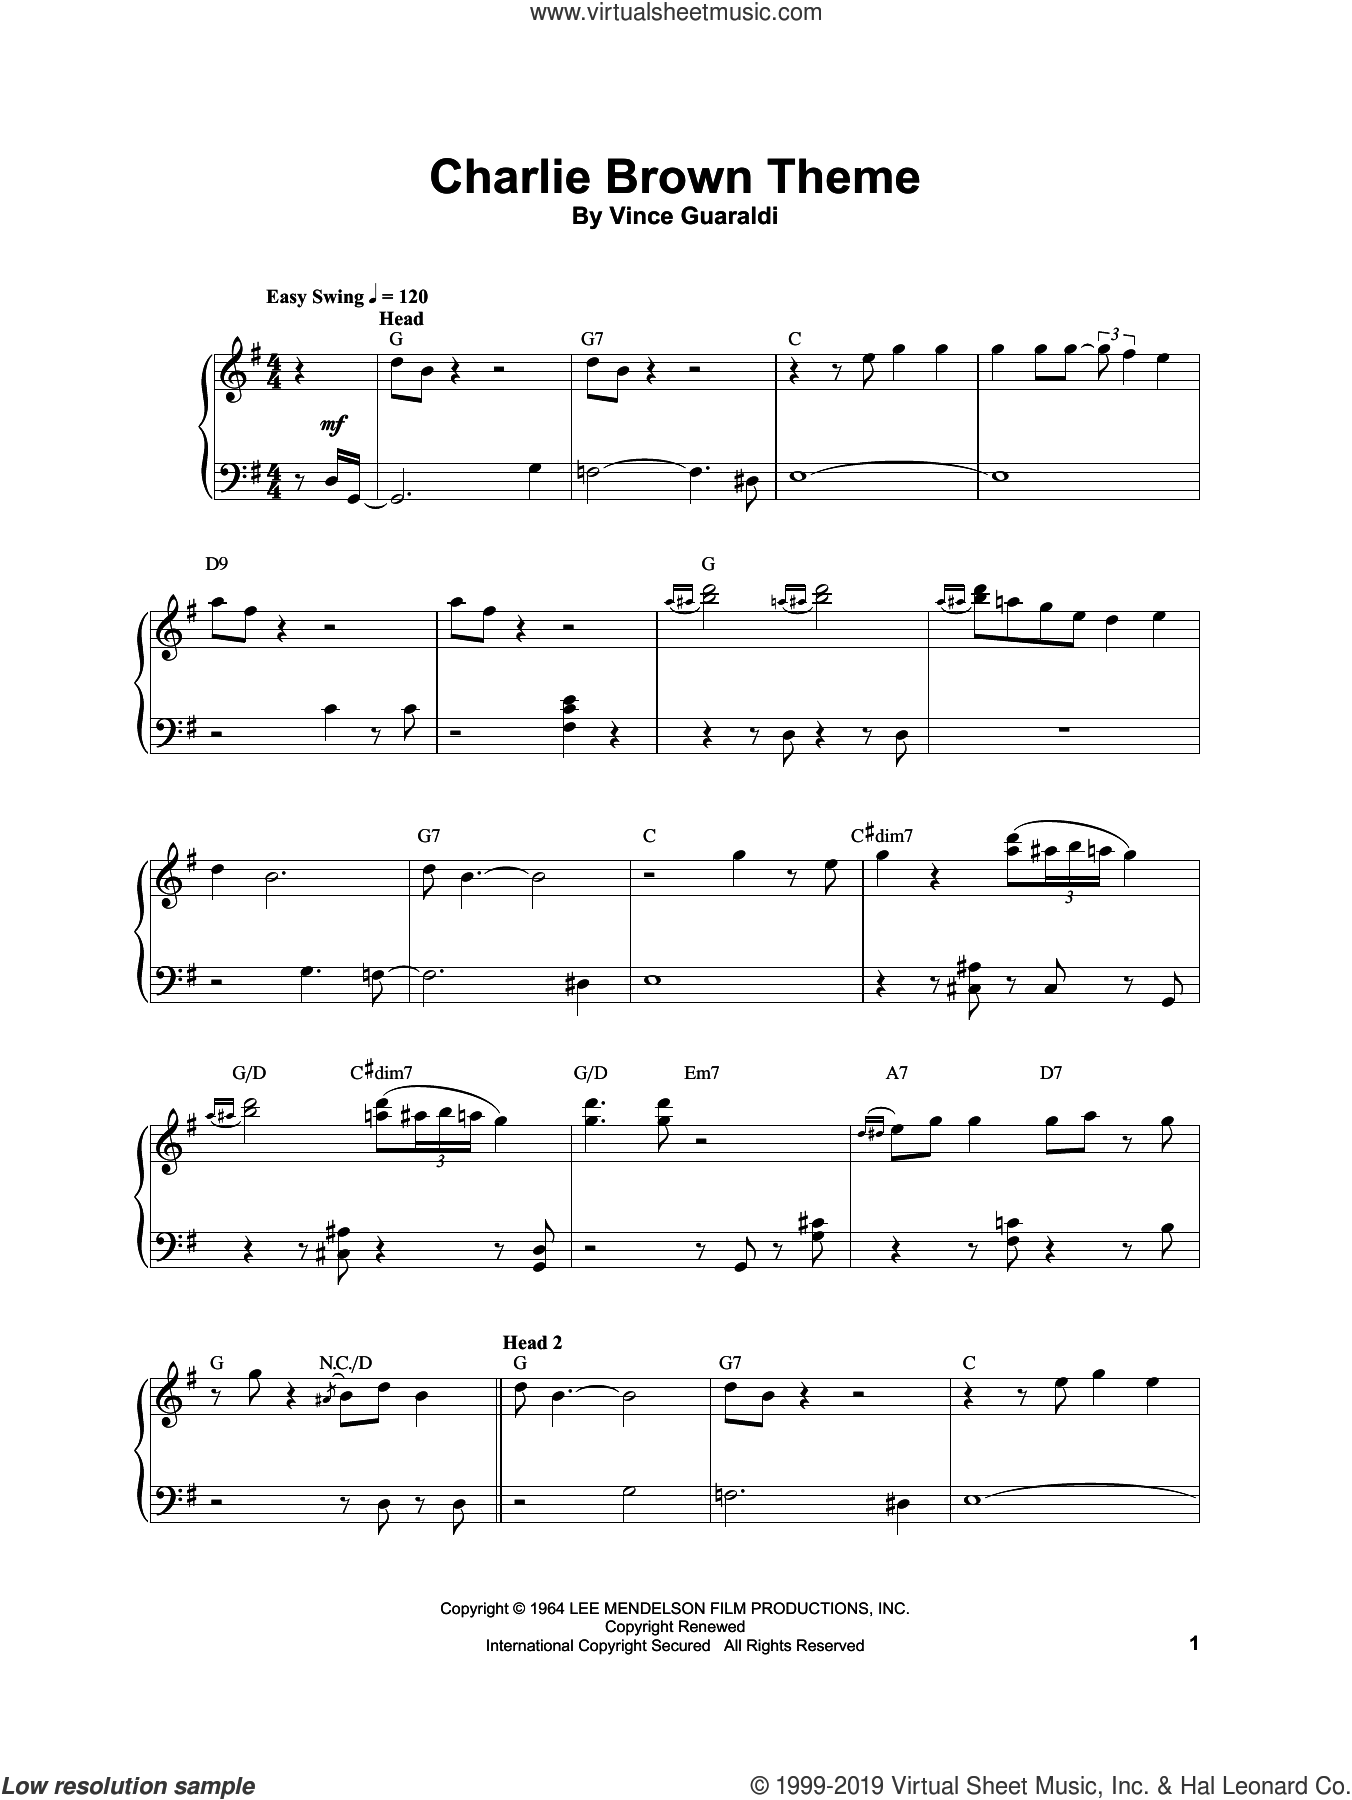 charlie-brown-theme-sheet-music-intermediate-for-piano-solo